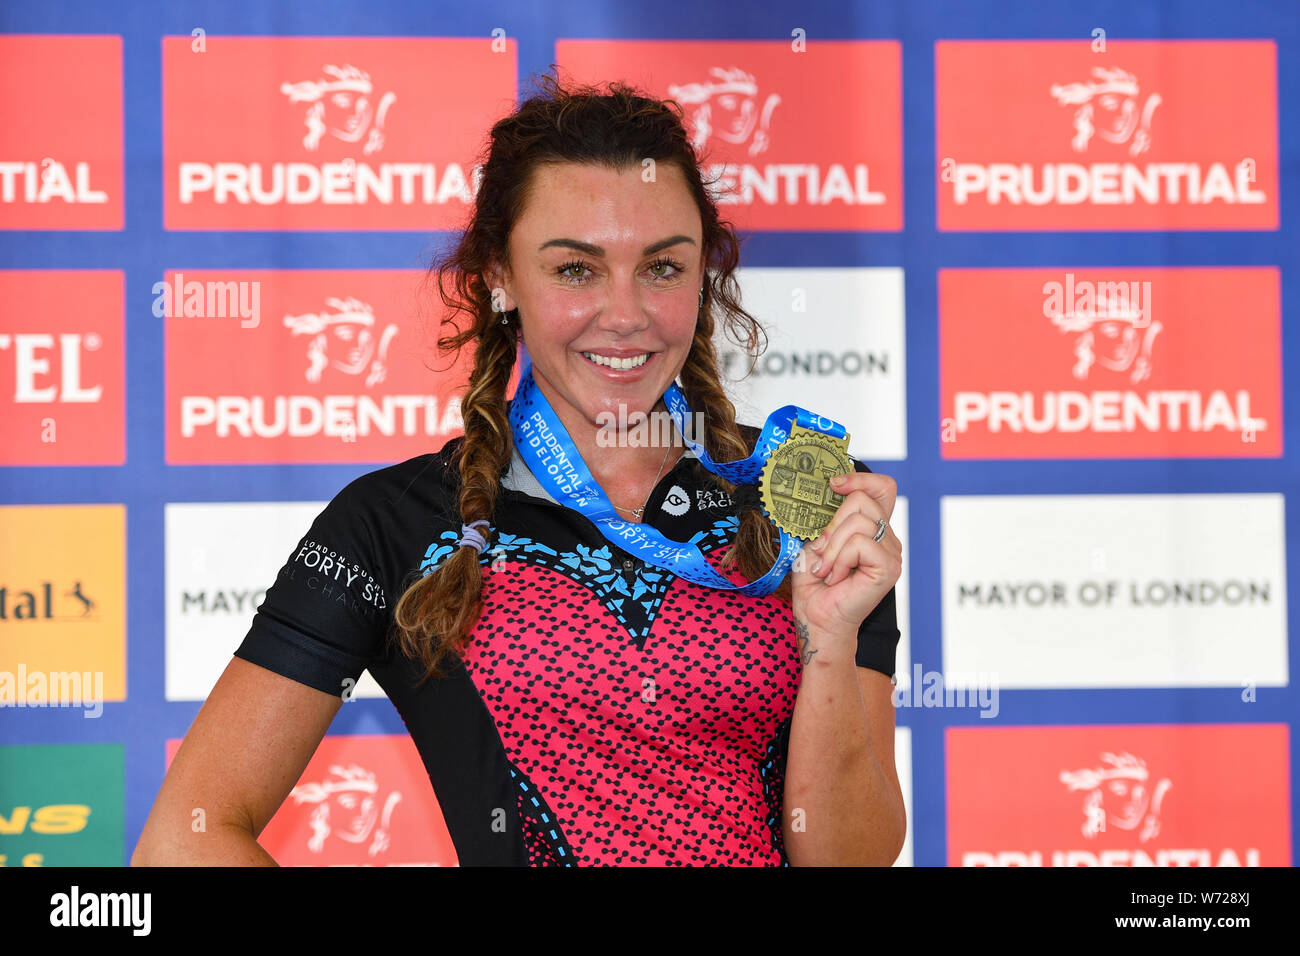 London, UK. 04th Aug, 2019. Michelle Heaton English pop group Liberty X and personal trainer was interviewed by Prudential TV interview after completed her 25 miles Challenge during Prudential RideLondon at The Mall on Sunday, August 04, 2019 in LONDON United Kingdom. Credit: Taka G Wu/Alamy Live News Stock Photo